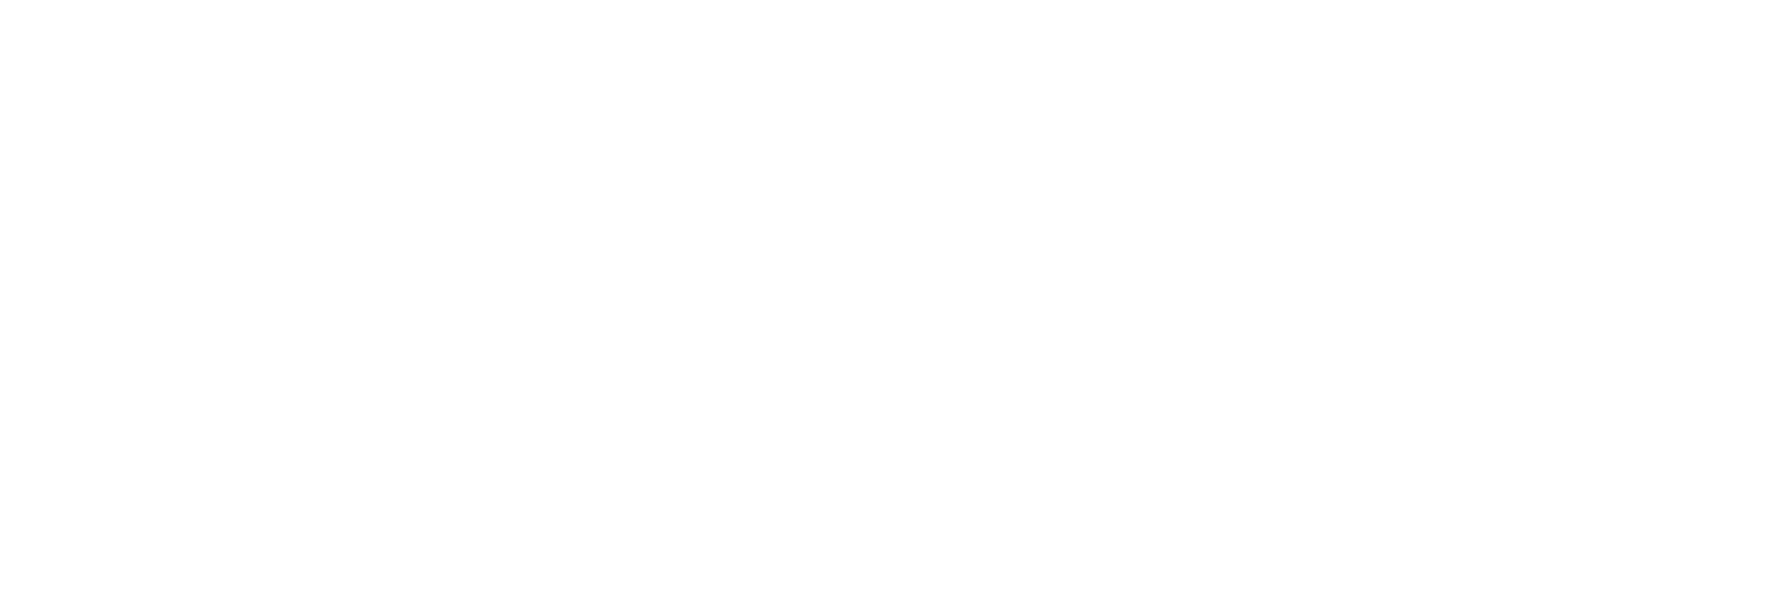 PineappleConsults Hospitality Inc.